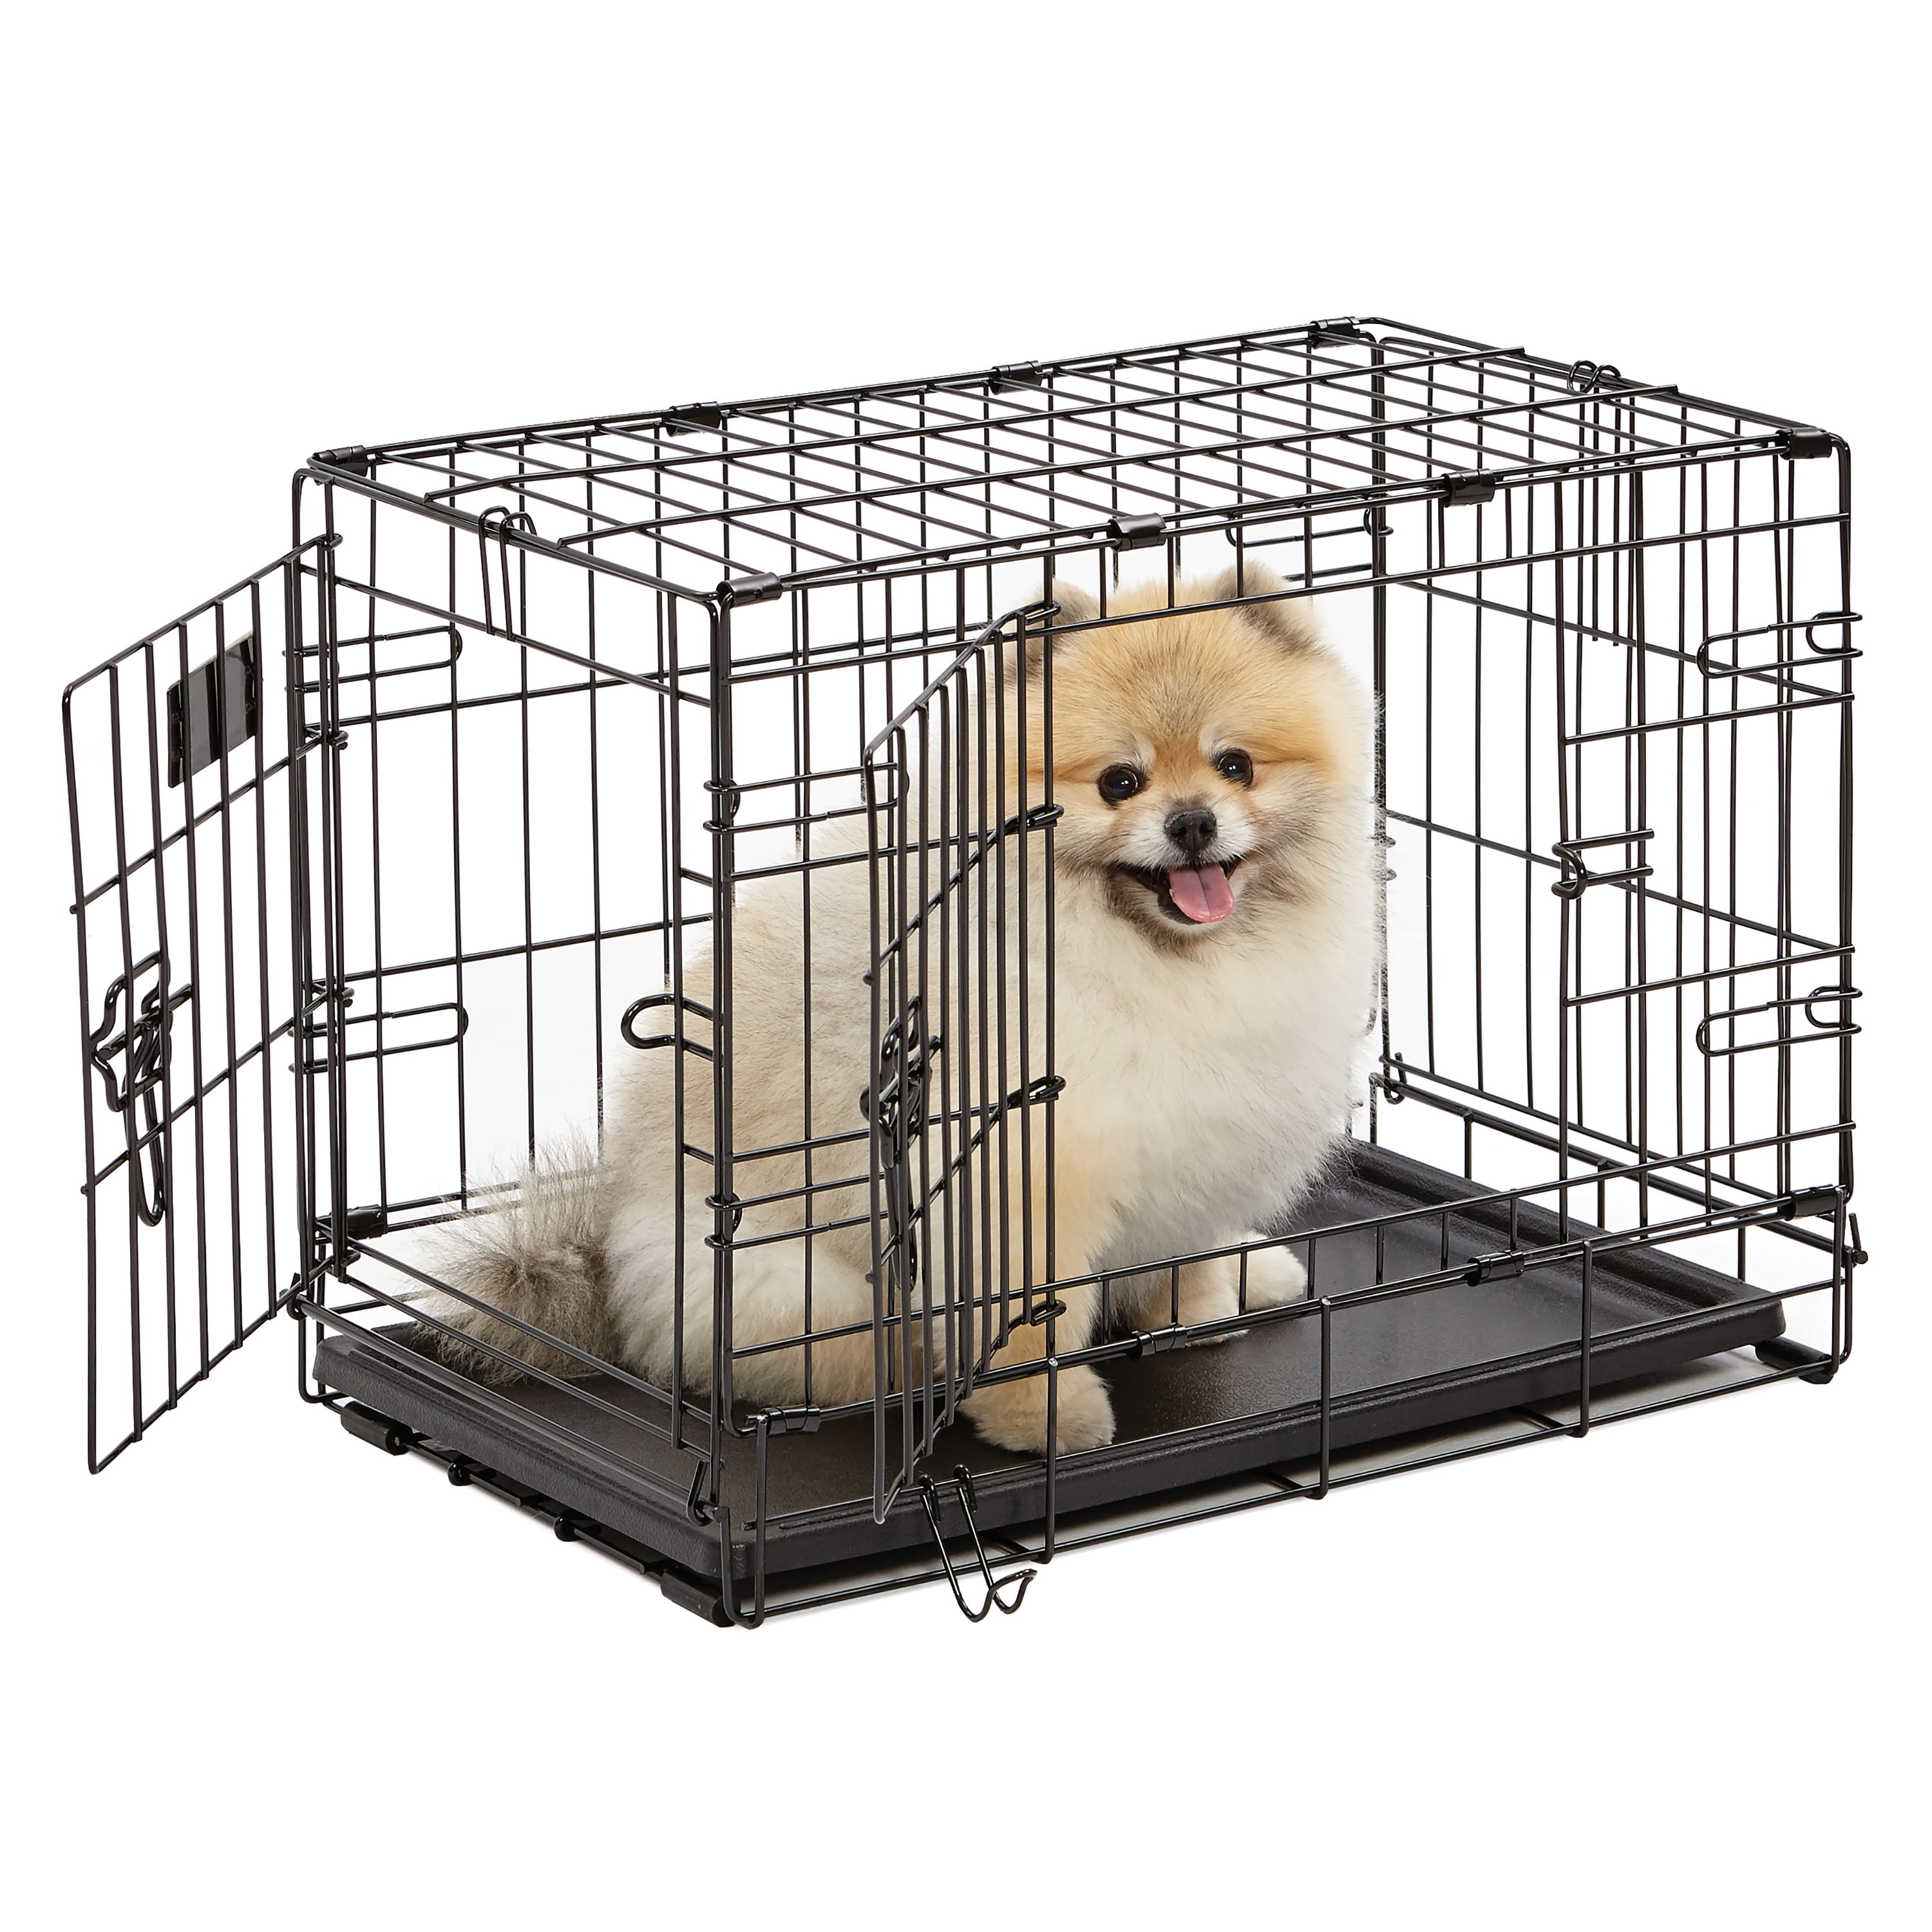 Photo 1 of MidWest Double Door iCrate Metal Dog Crate, 22"x13x16 inches